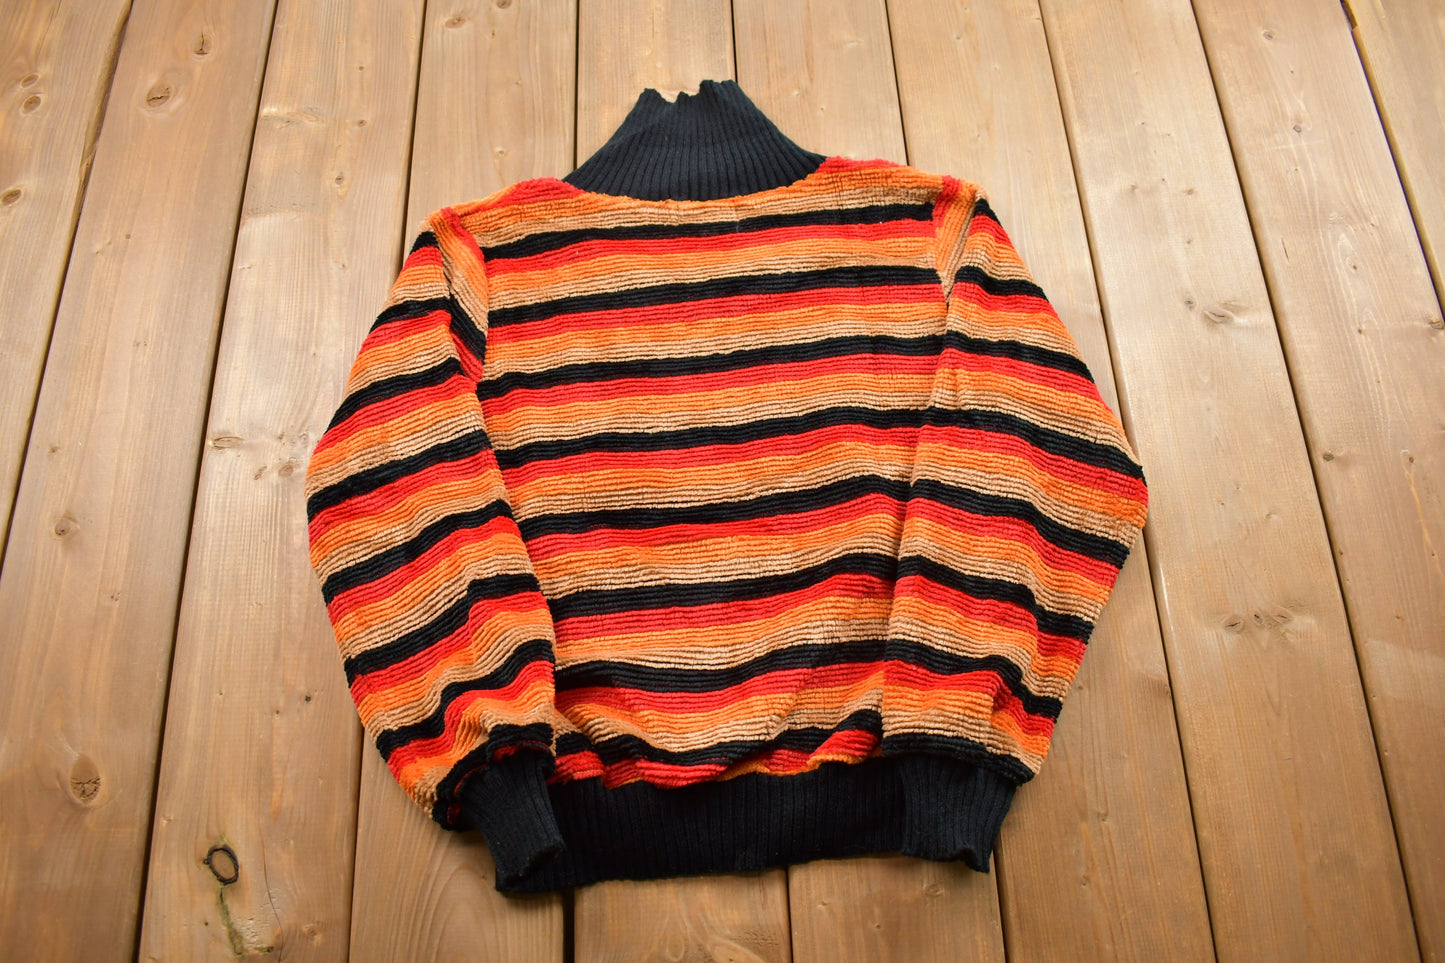 Vintage 1990s Cadogan Court Striped Knitted Sweater / Vintage 90s Sweater / All Over Pattern / Colorful / Sweatshirt / Abstract Pattern